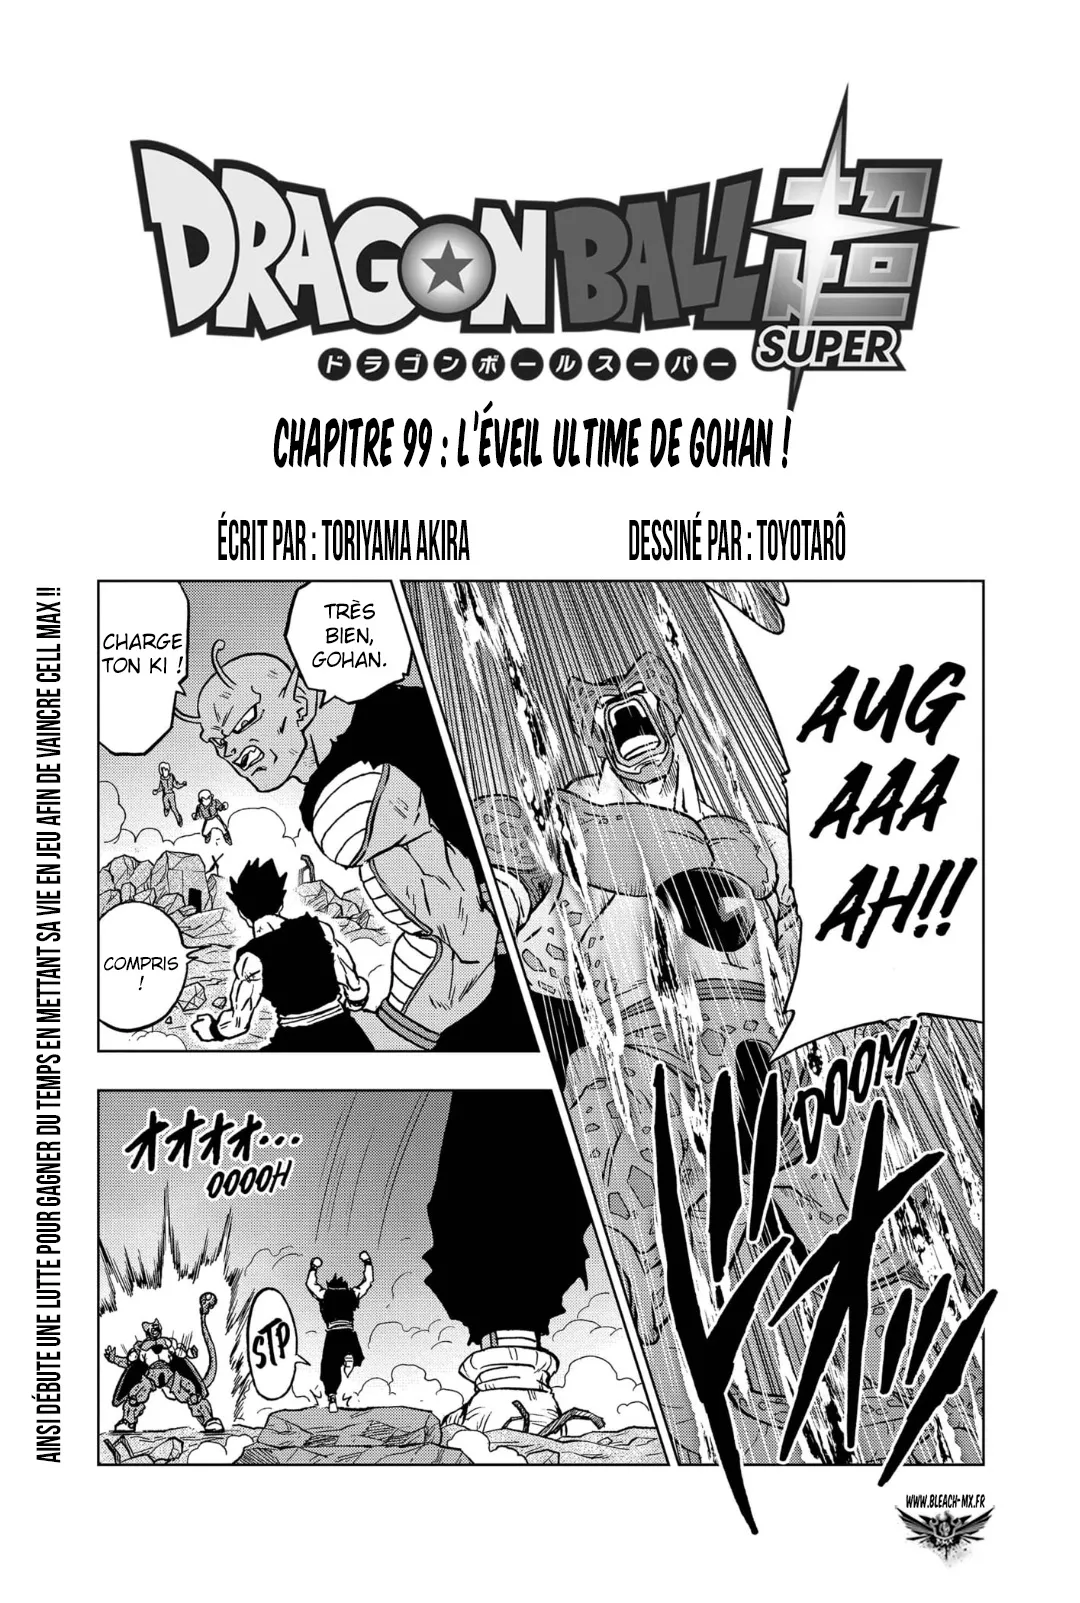 Dragon Ball Super: Chapter chapitre-99 - Page 1